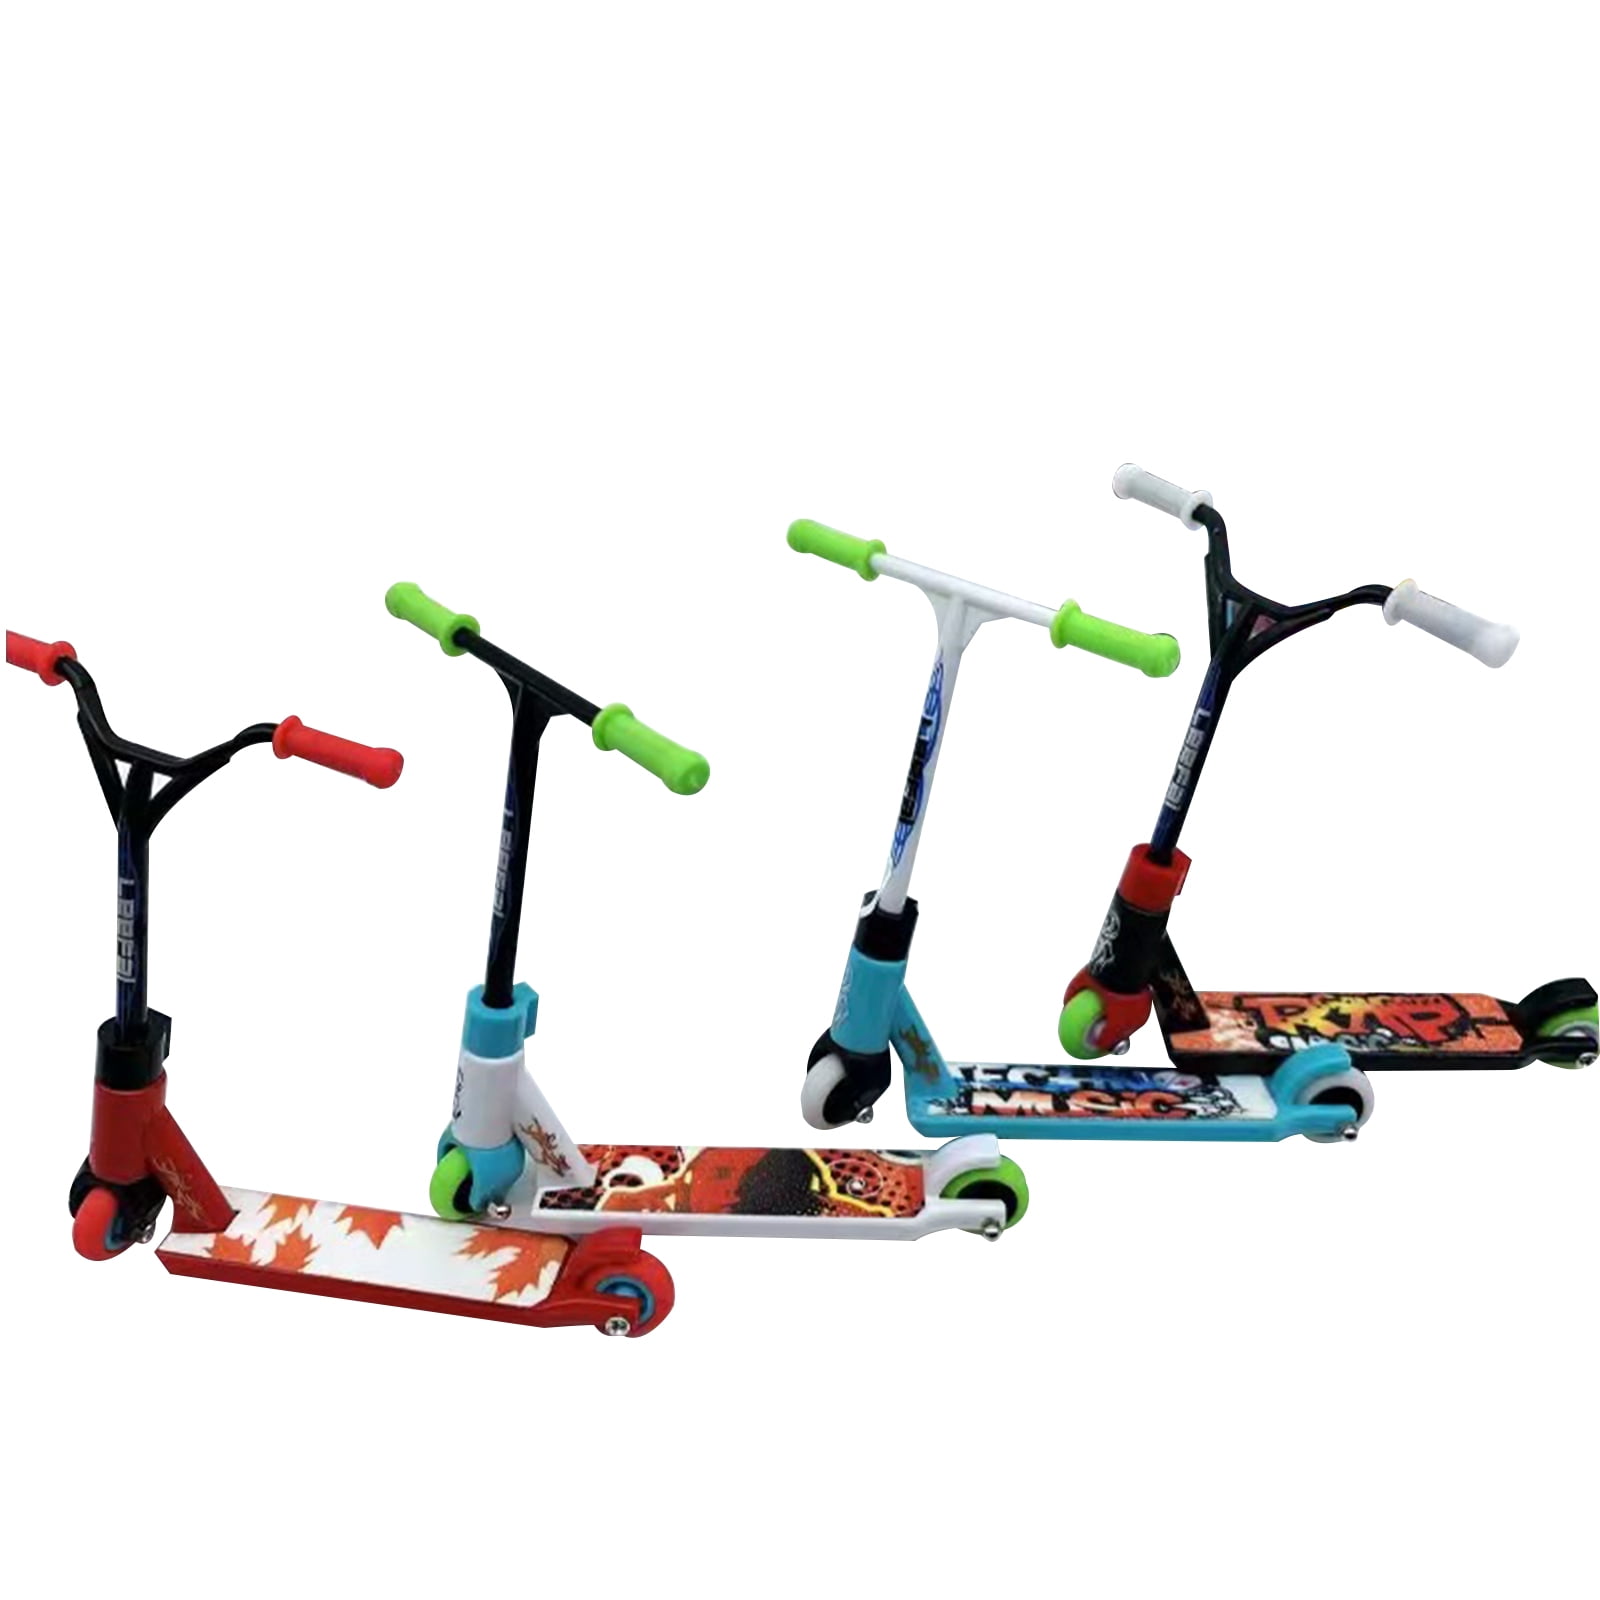 WARIGOOD Professional Finger Scooter Toy Made of Alloy Metal for Fingerboard Obstacles Fingerboard Parks and Competitions - Walmart.com